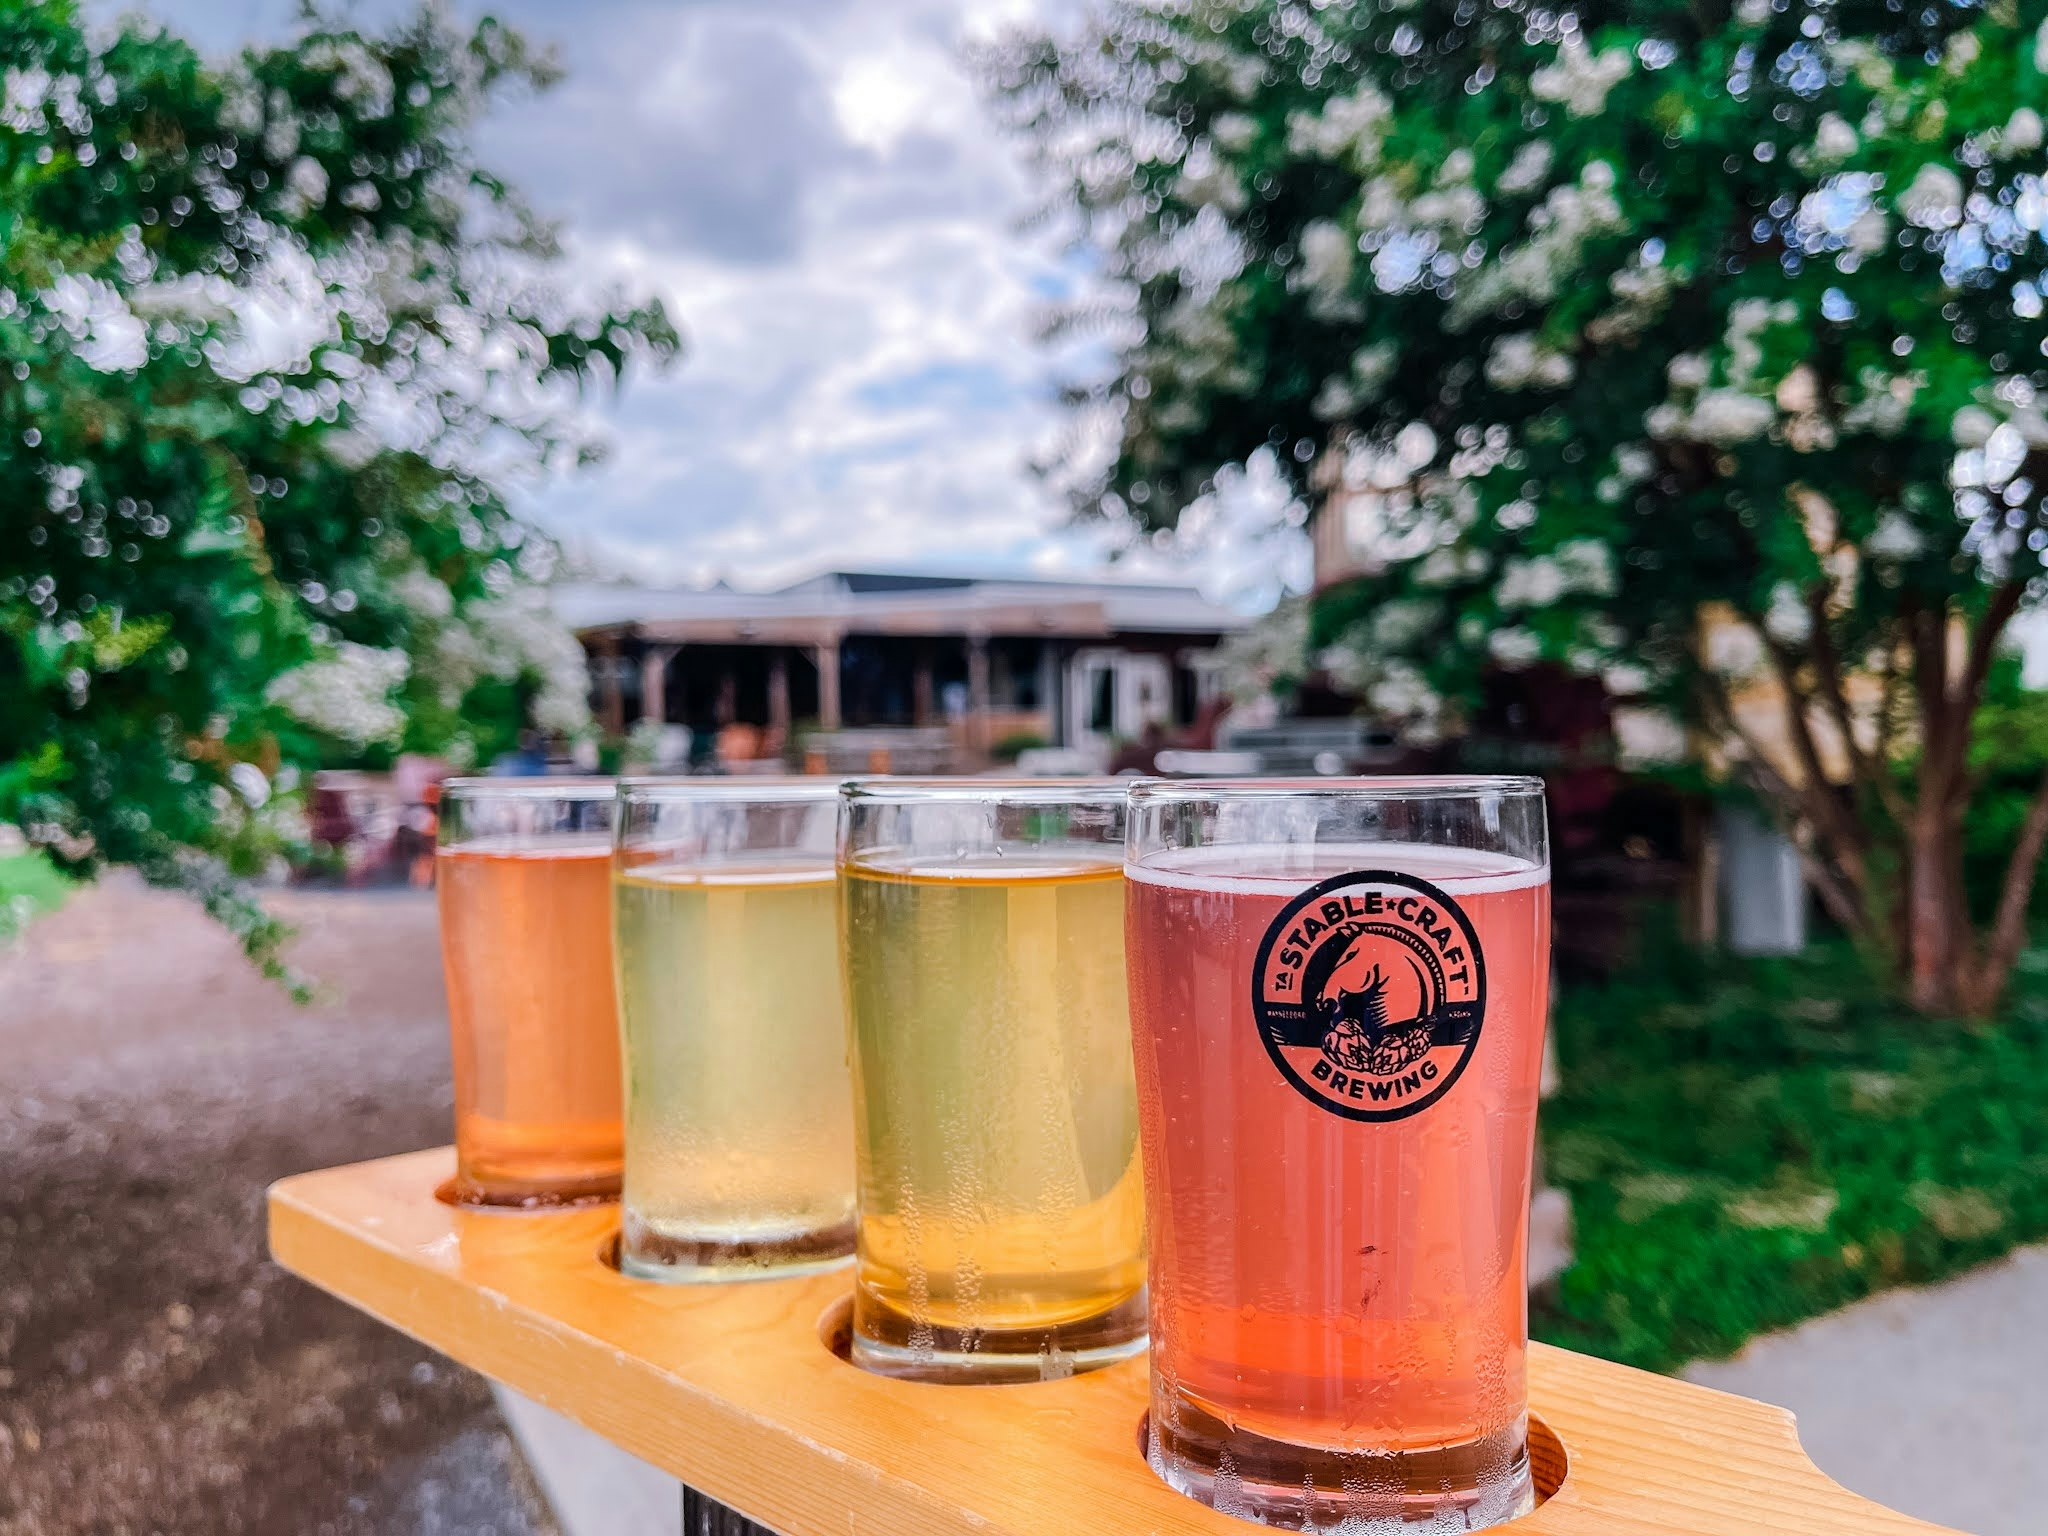 A flight of four glasses of cider from Stable Craft brewing in Virginia 